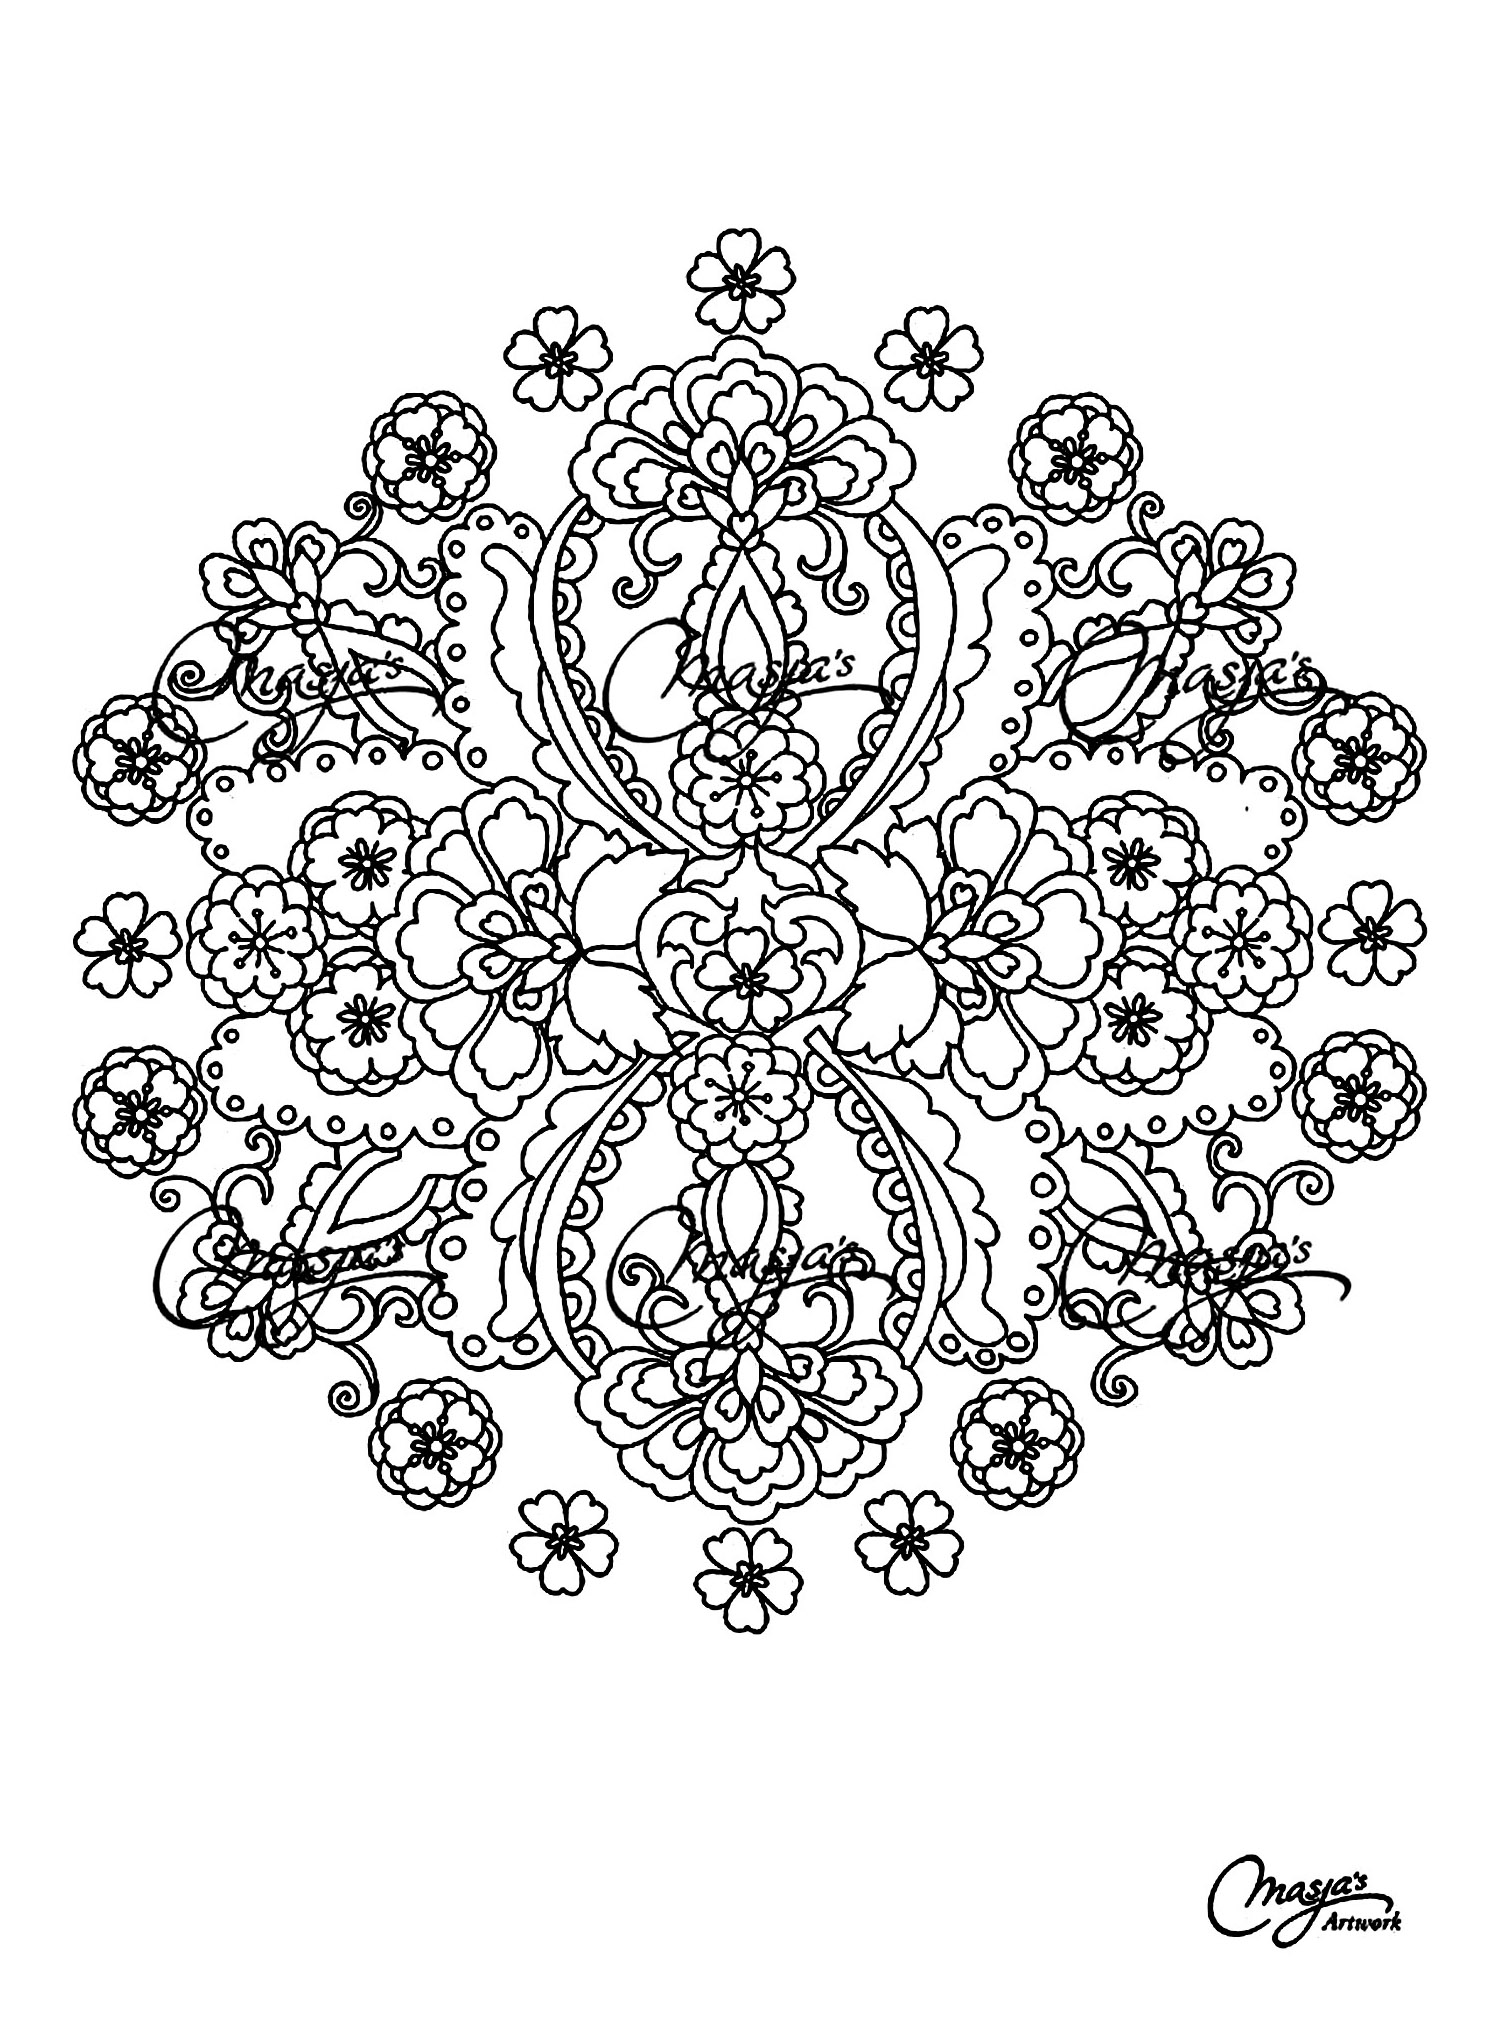 Mandala to color difficult - 9